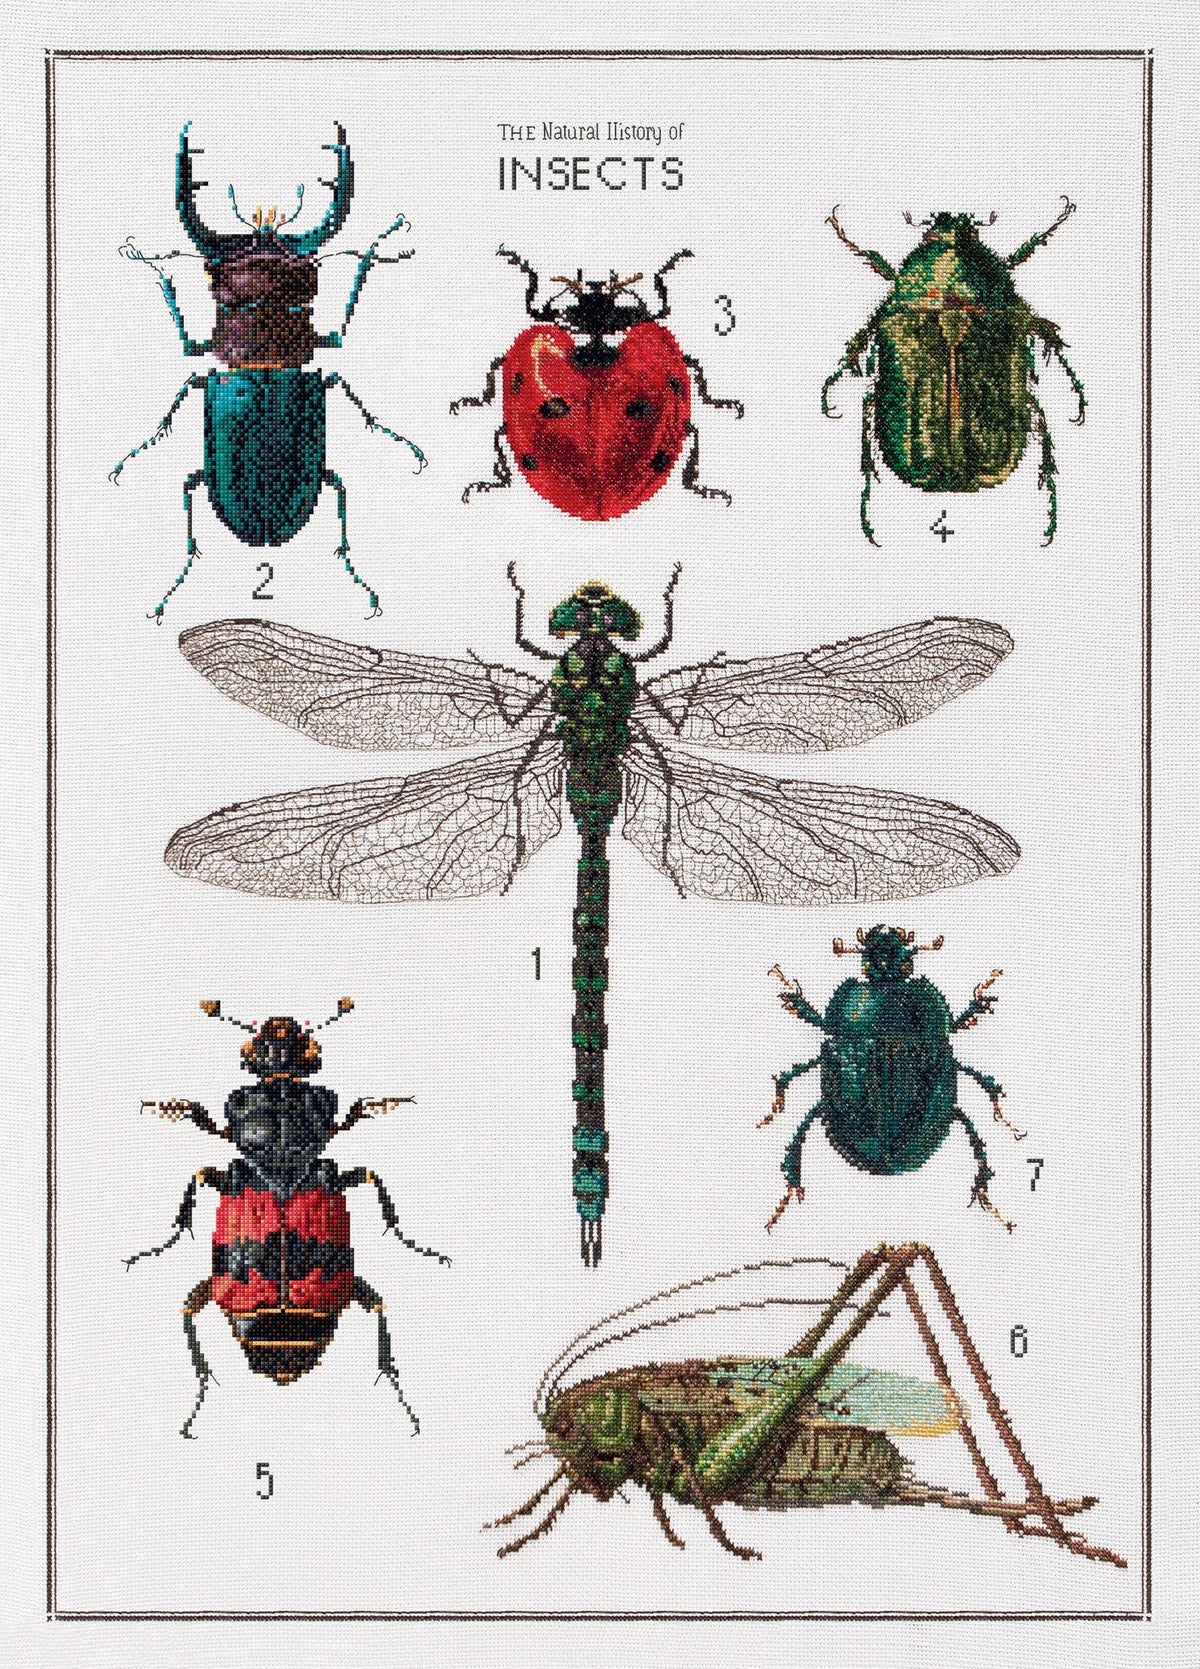 Thea Gouverneur - Counted Cross Stitch Kit - The History of Insects - Aida - 14 count - 566A - Thea Gouverneur Since 1959